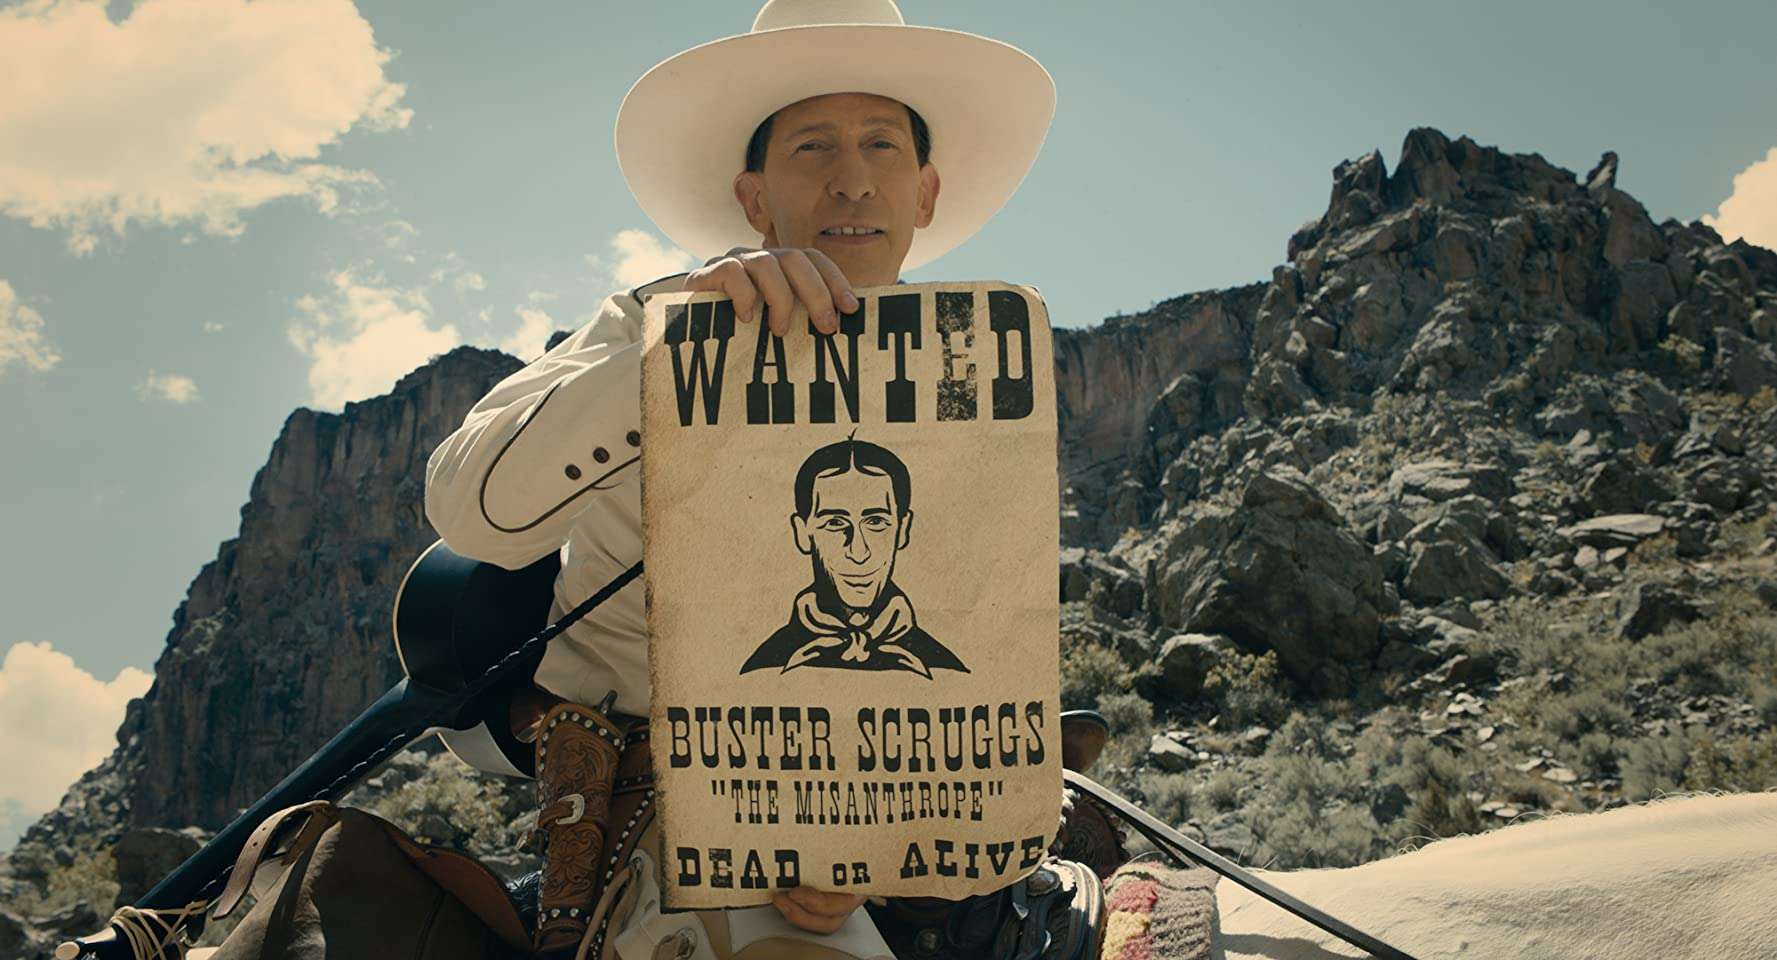 The-Ballad-Of-Buster-Scruggs-2018